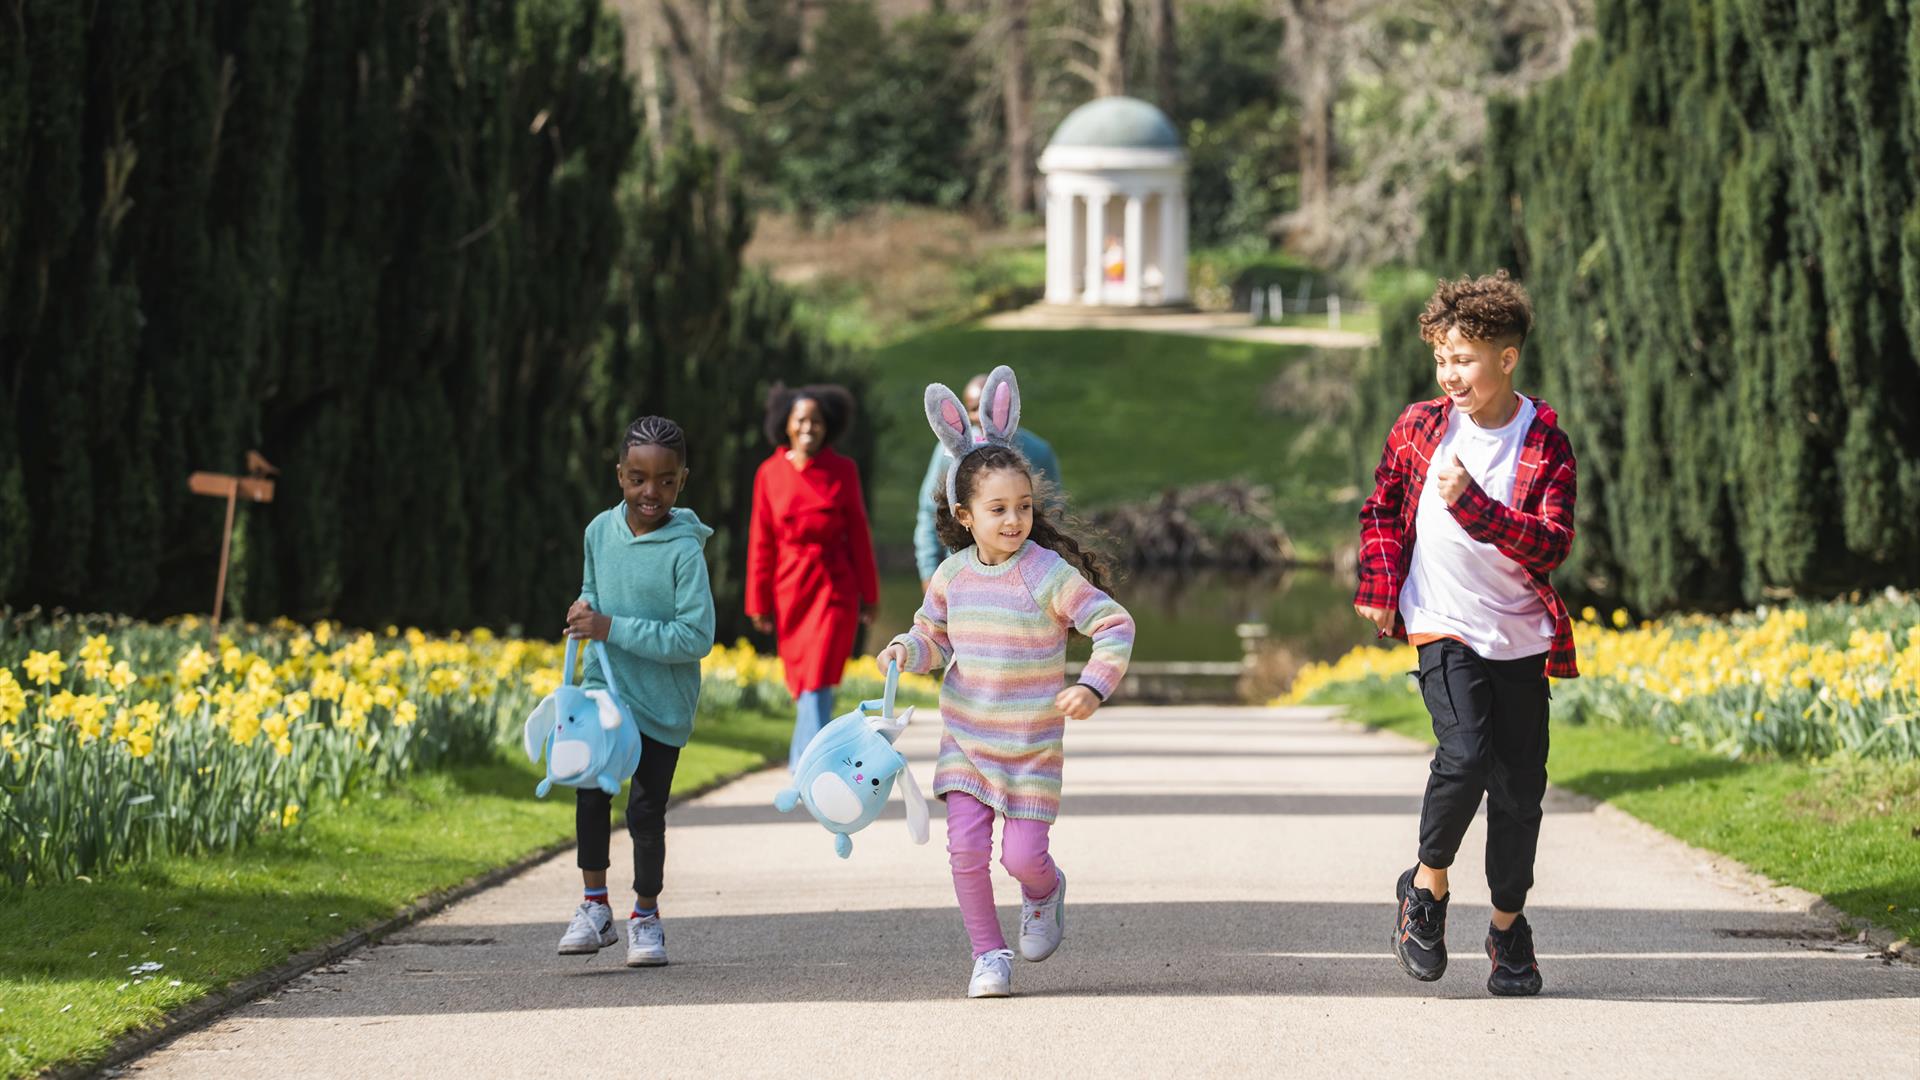 Kids with Easter baskets running around Hillsborough Castle and Gardens looking for Lindt Bunny Statues